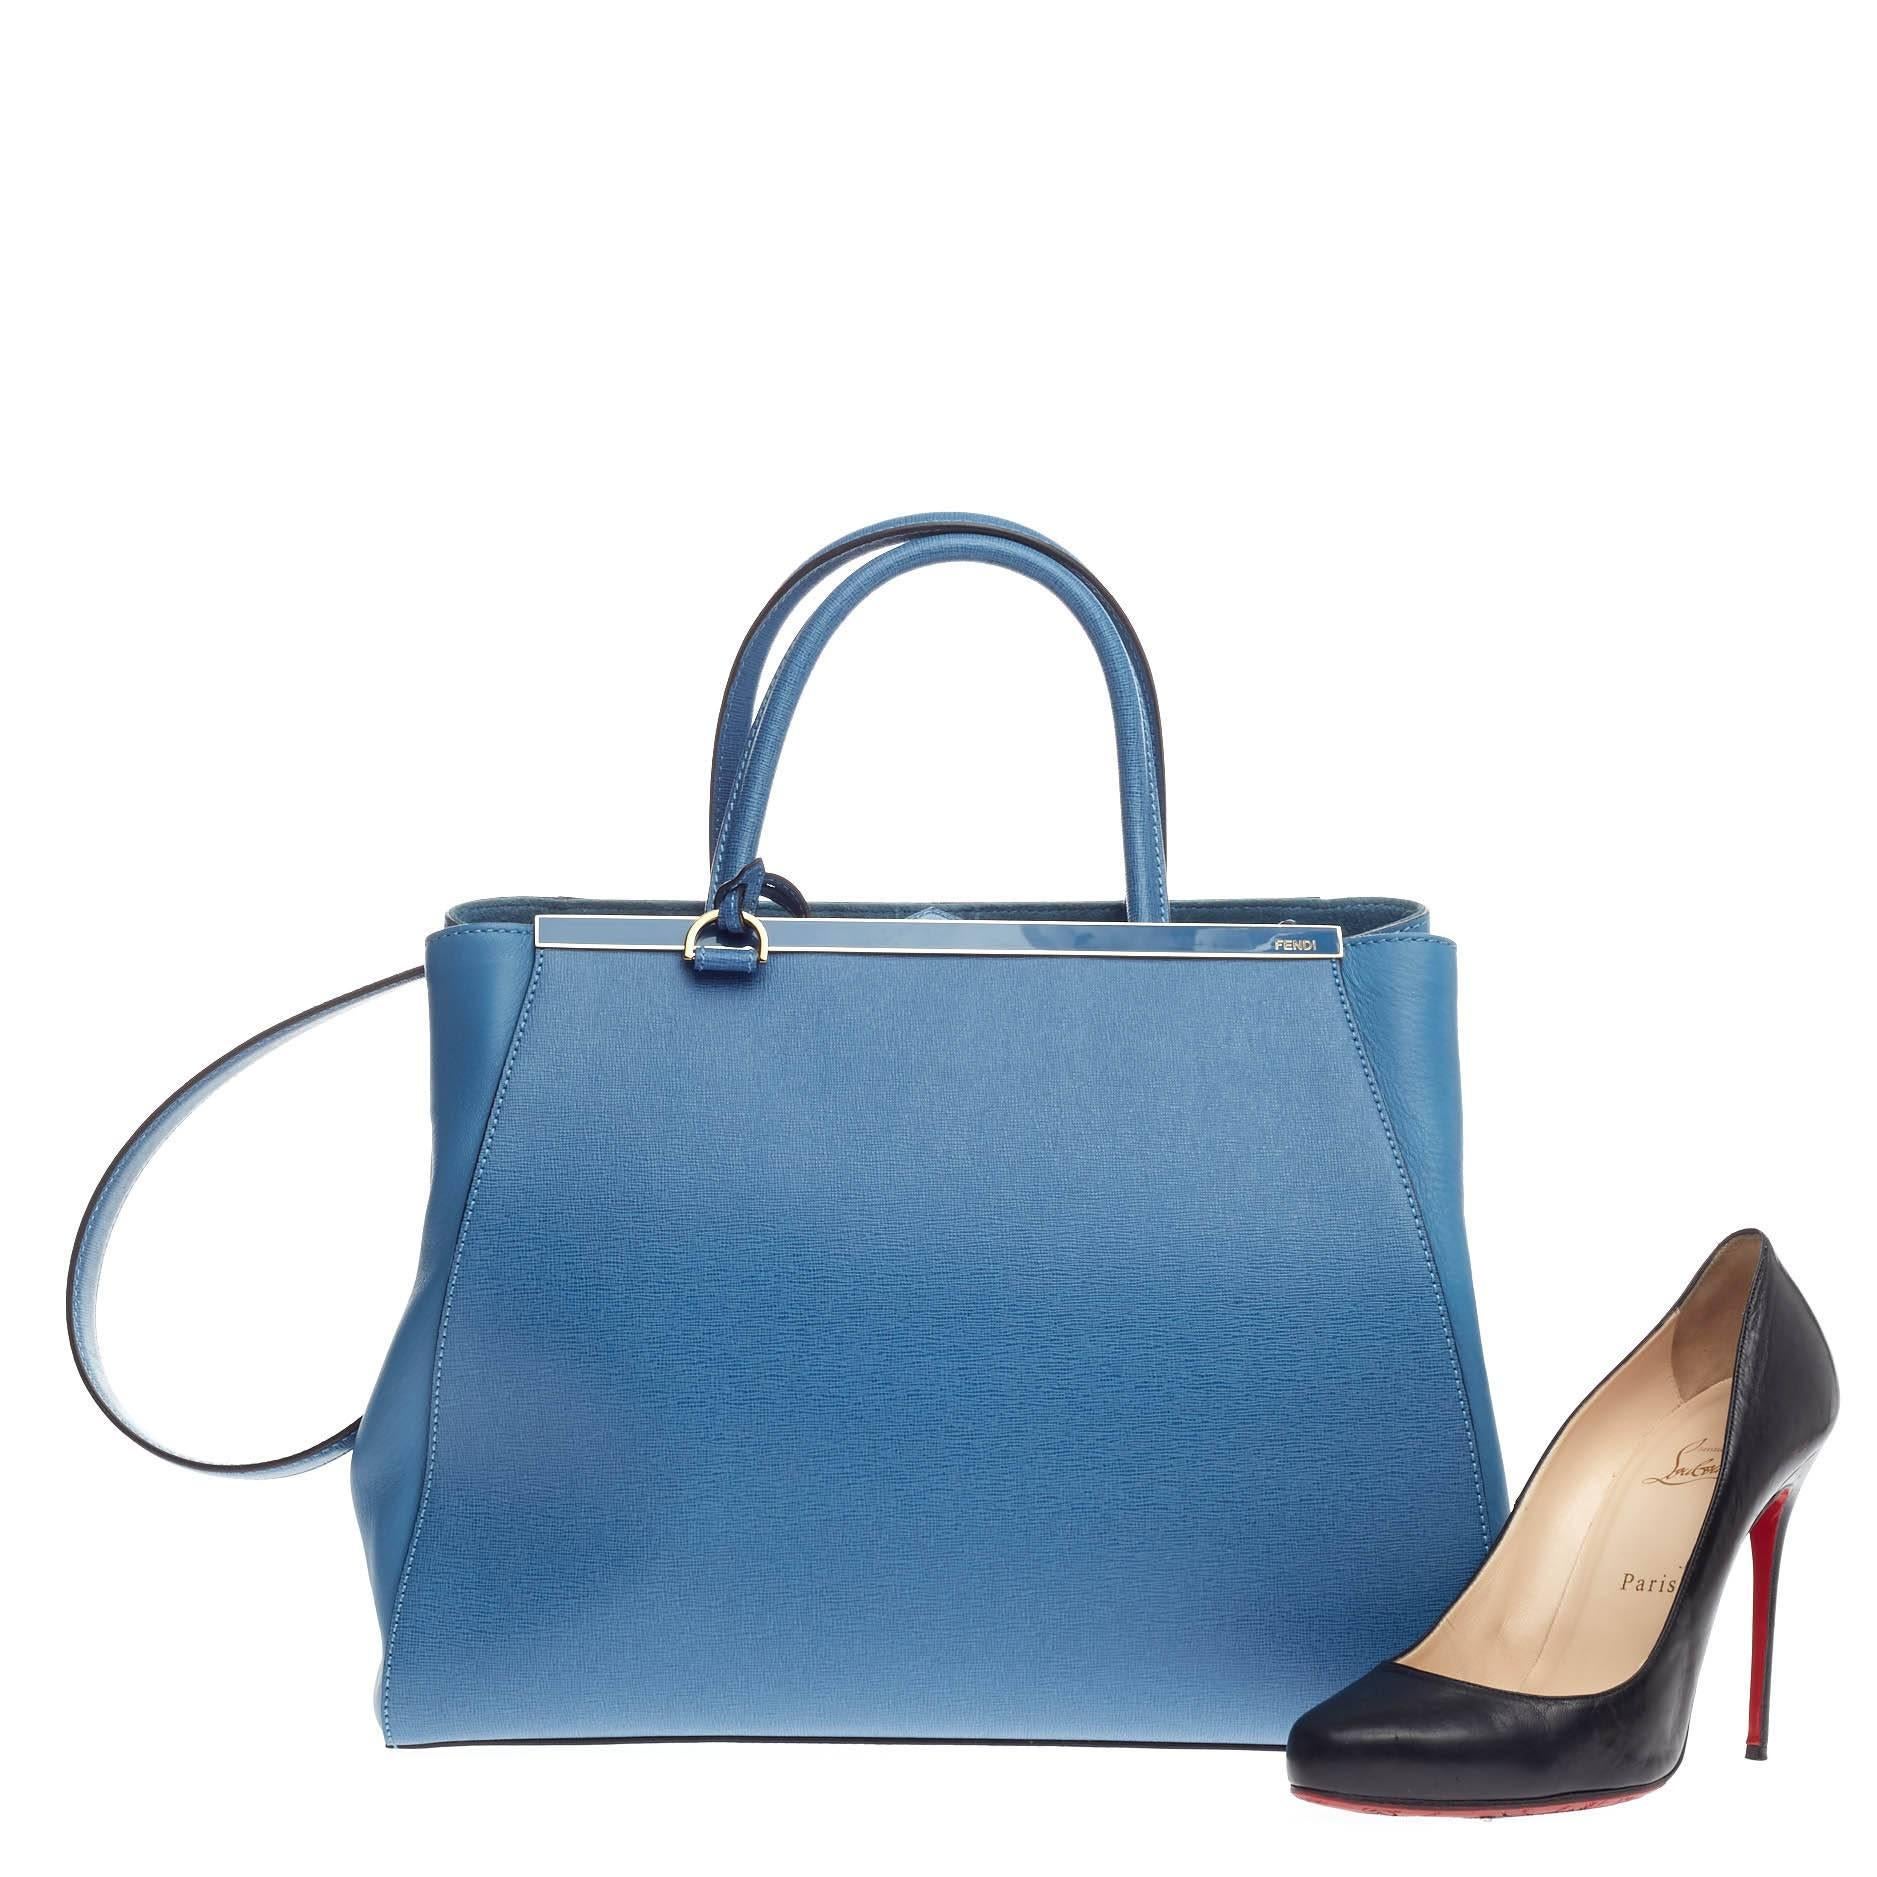 This authentic Fendi 2Jours Leather Medium is impeccably stylish simple silhouette and structured design. Finely crafted in sturdy sky blue leather with soft calfskin sides, this popular tote features a shining top bar that dons the Fendi brand